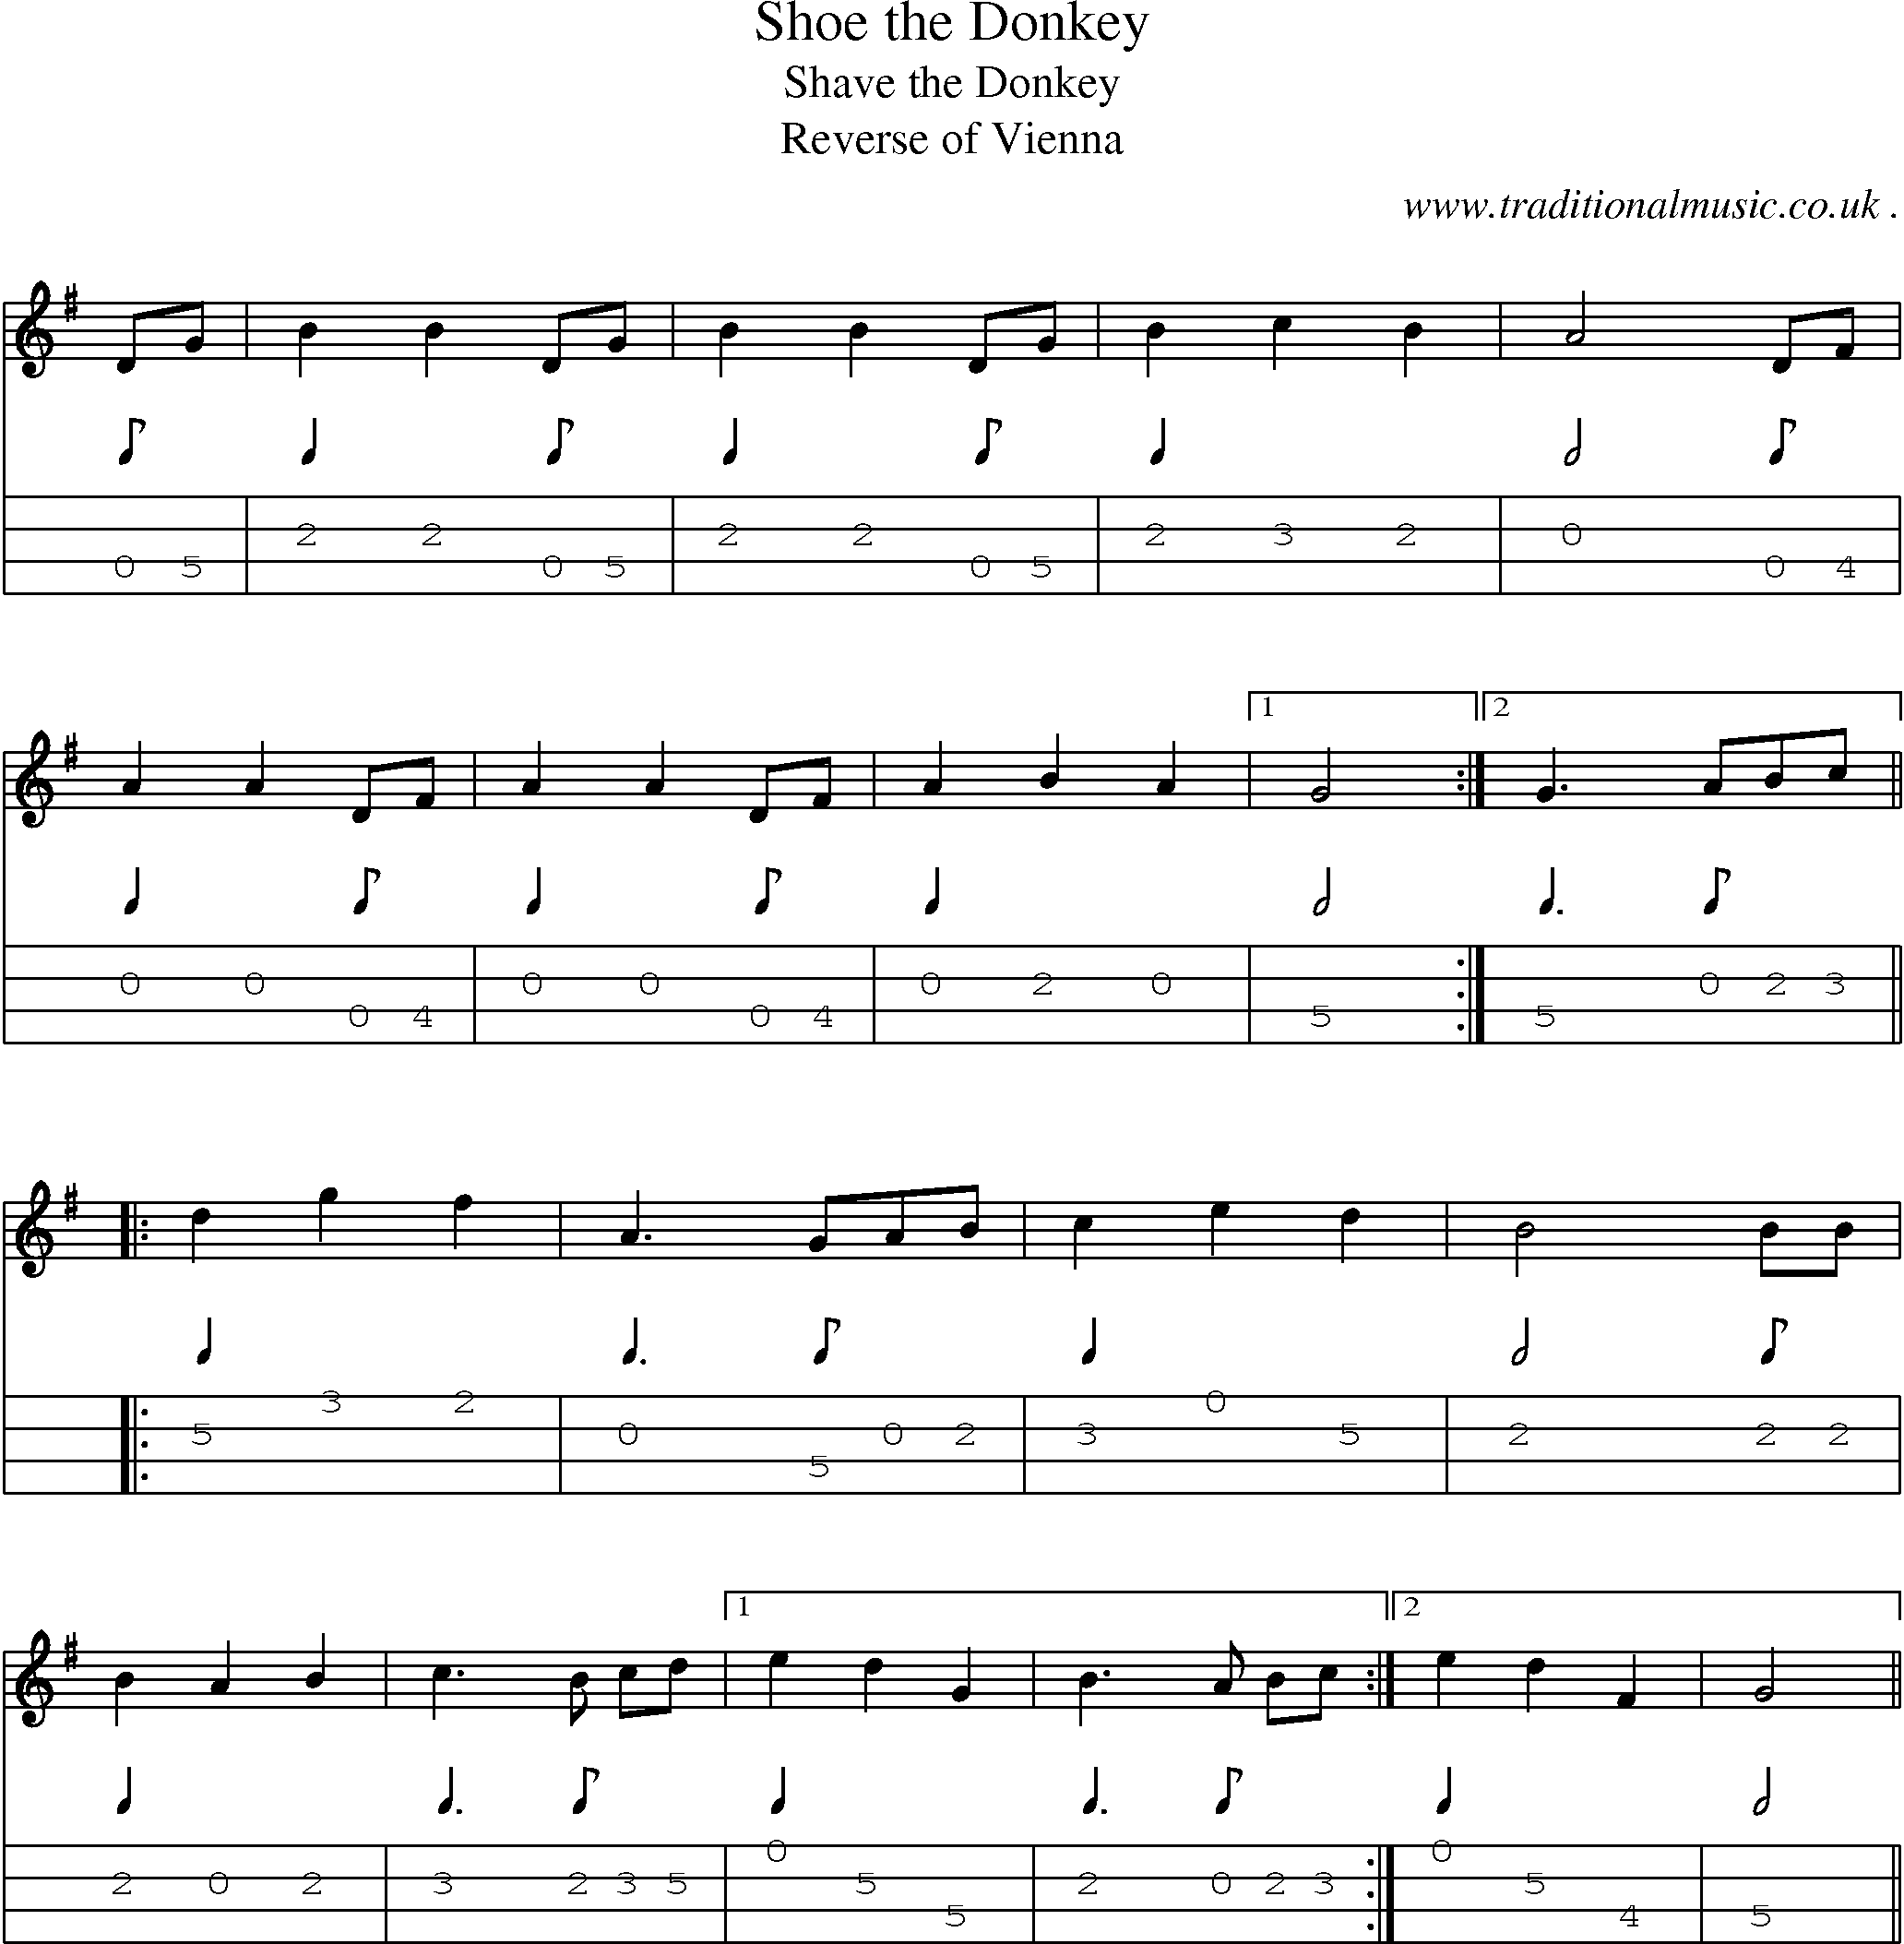 Sheet-Music and Mandolin Tabs for Shoe The Donkey